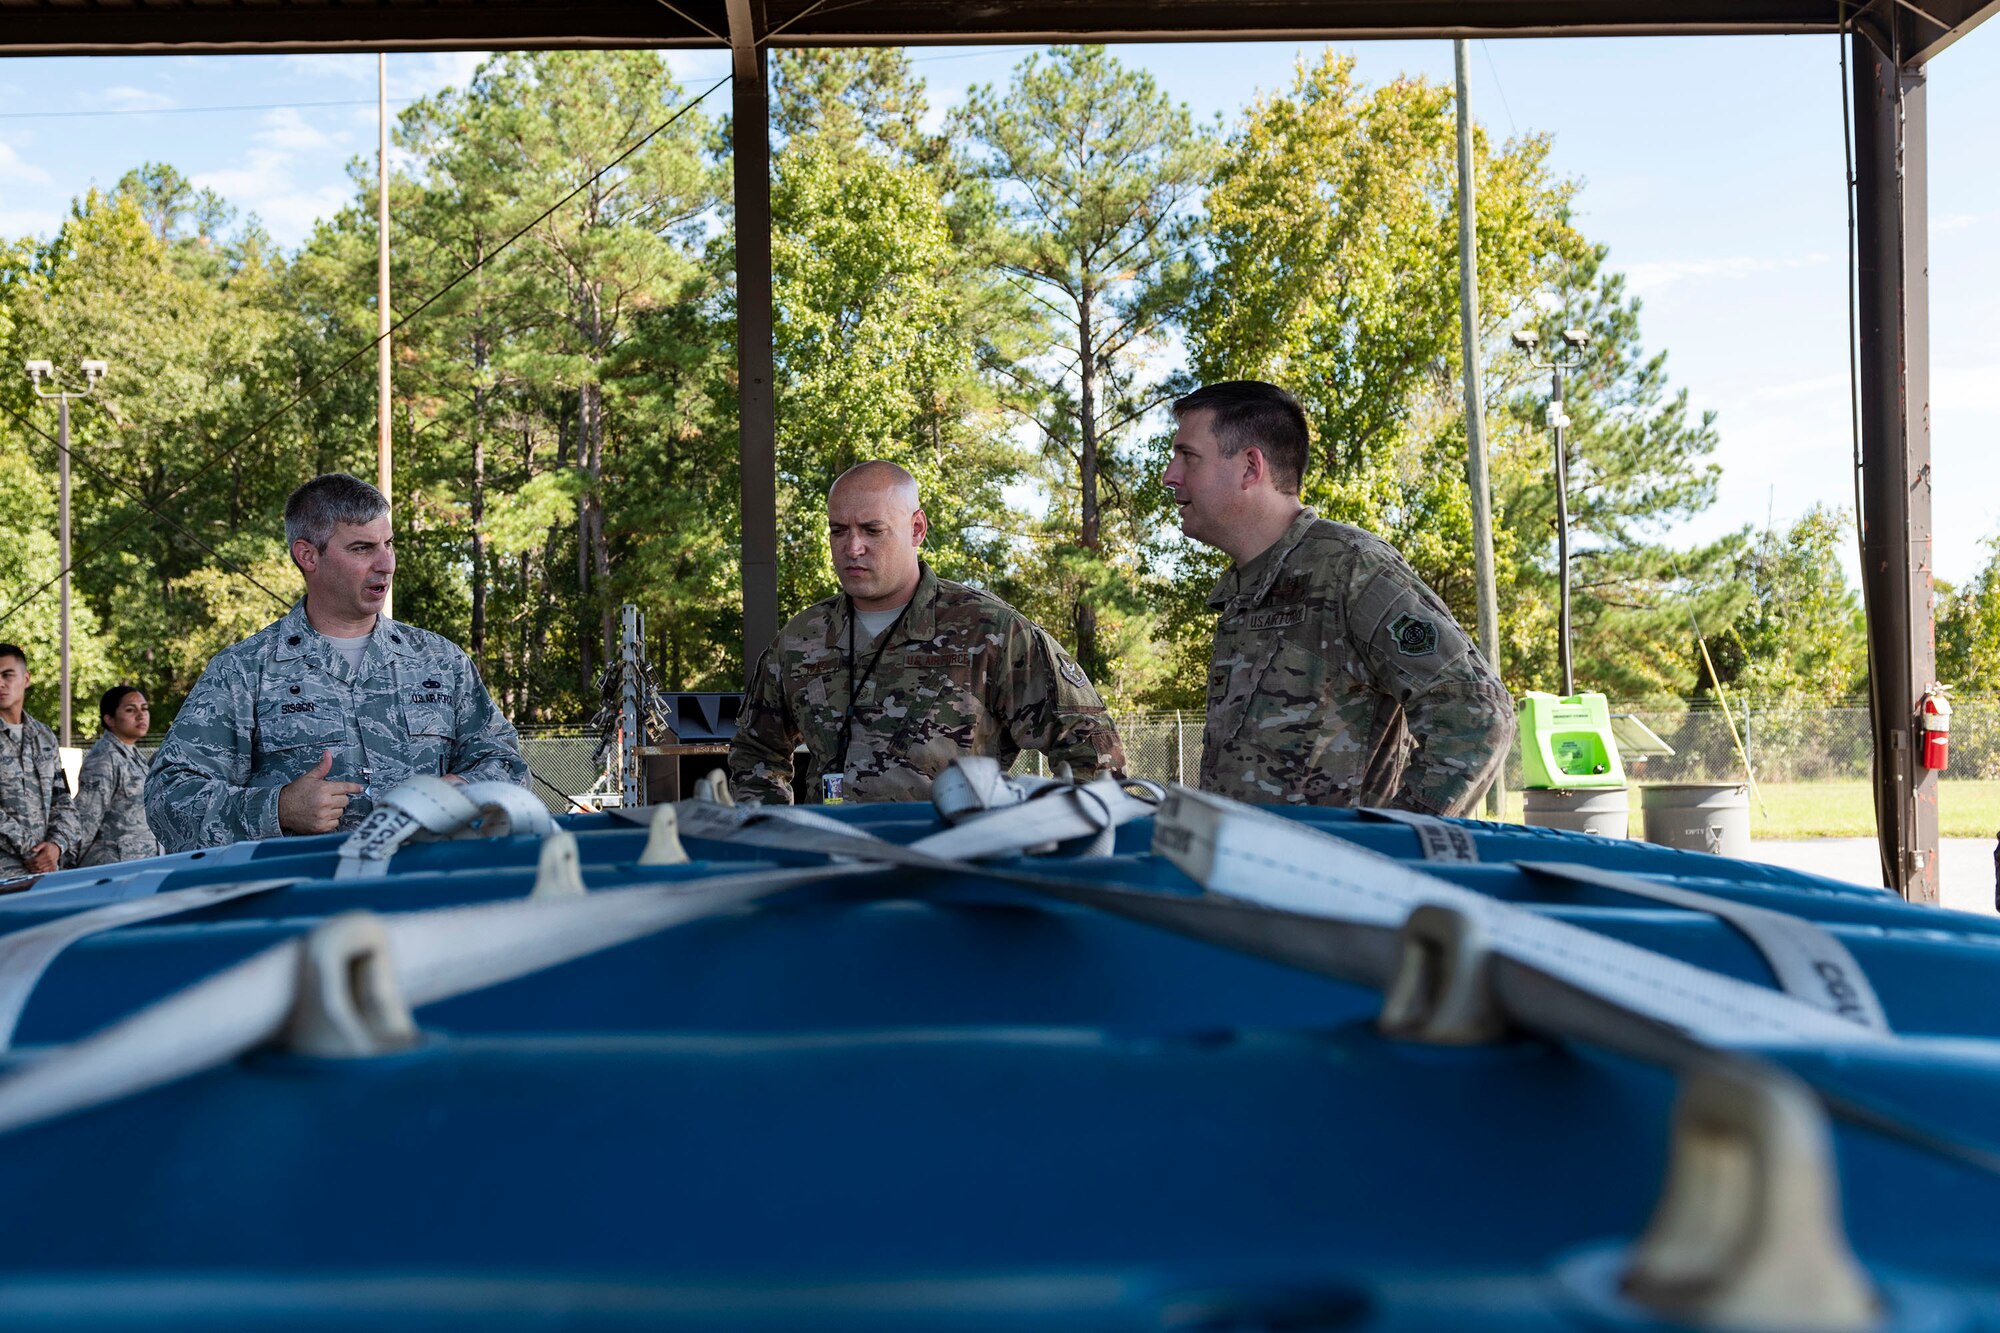 Col. Dan Walls, right, 23d Wing commander, speaks to 23d Maintenance Squadron (MXS) leadership during an immersion tour Oct. 28, 2019, at Moody Air Force Base, Ga. Walls toured the 23d MXS munitions flight facilities, where the Airmen showcased their squadron and mission. This gave Walls the opportunity to see how 23d MXS improves deployability and ensures mission readiness. (U.S. Air Force photo by Senior Airman Erick Requadt)